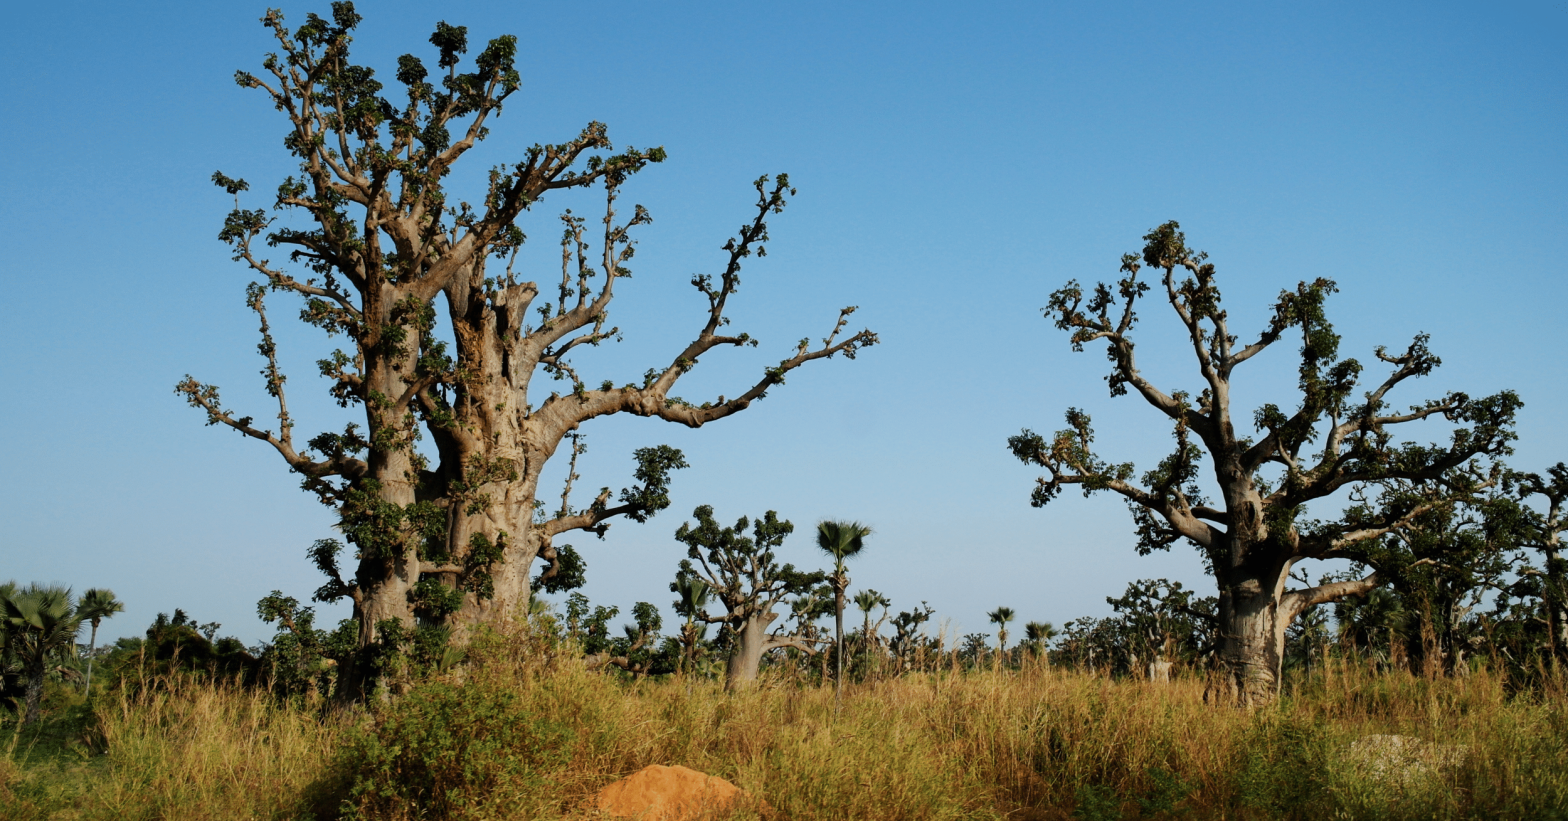 Landscape with giant baobab forest in Senegal.